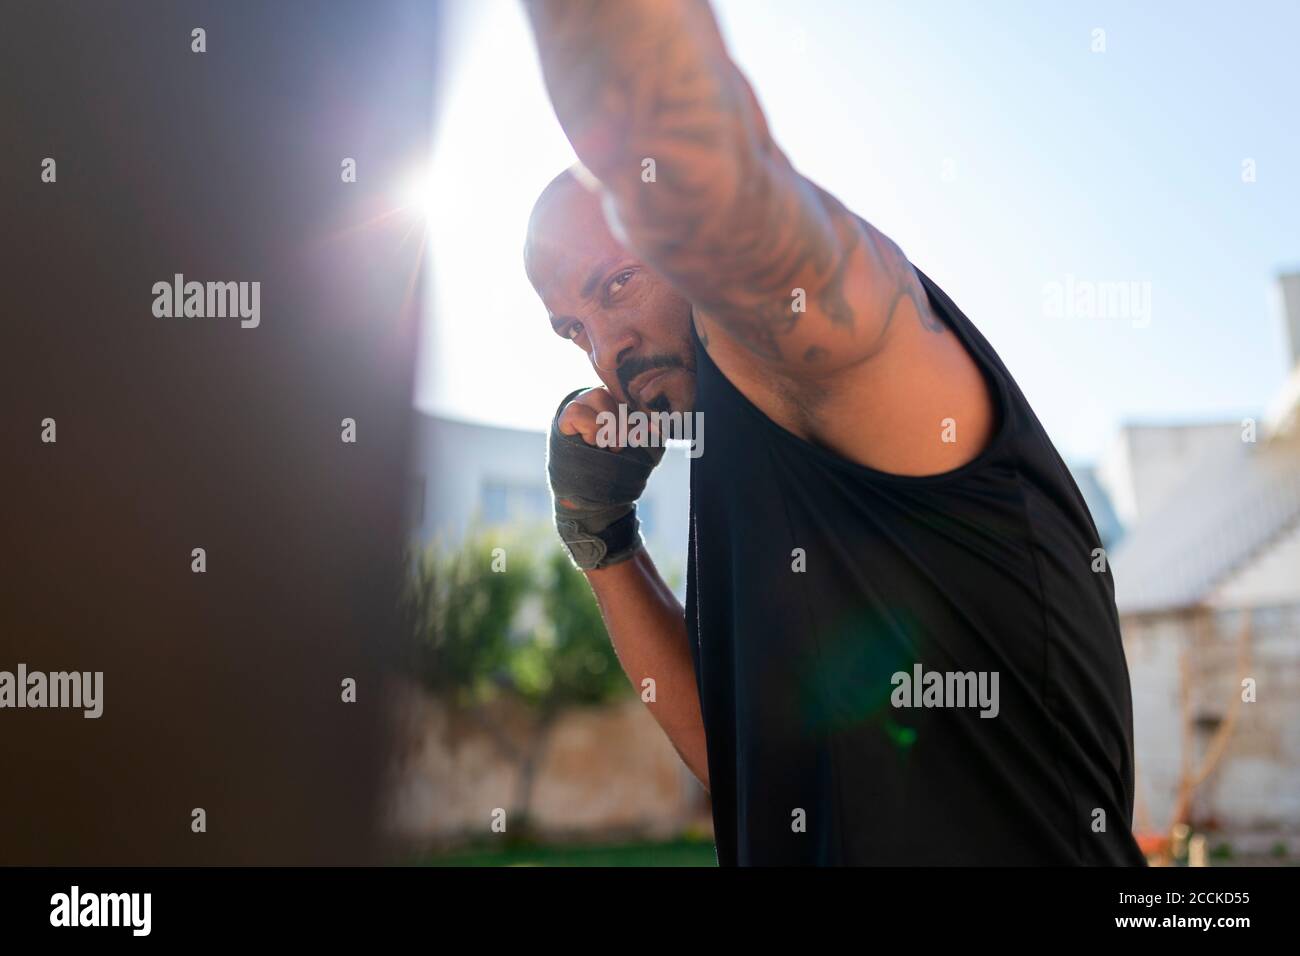 Confident mature man practicing boxing with punching bag against clear sky in yard Stock Photo